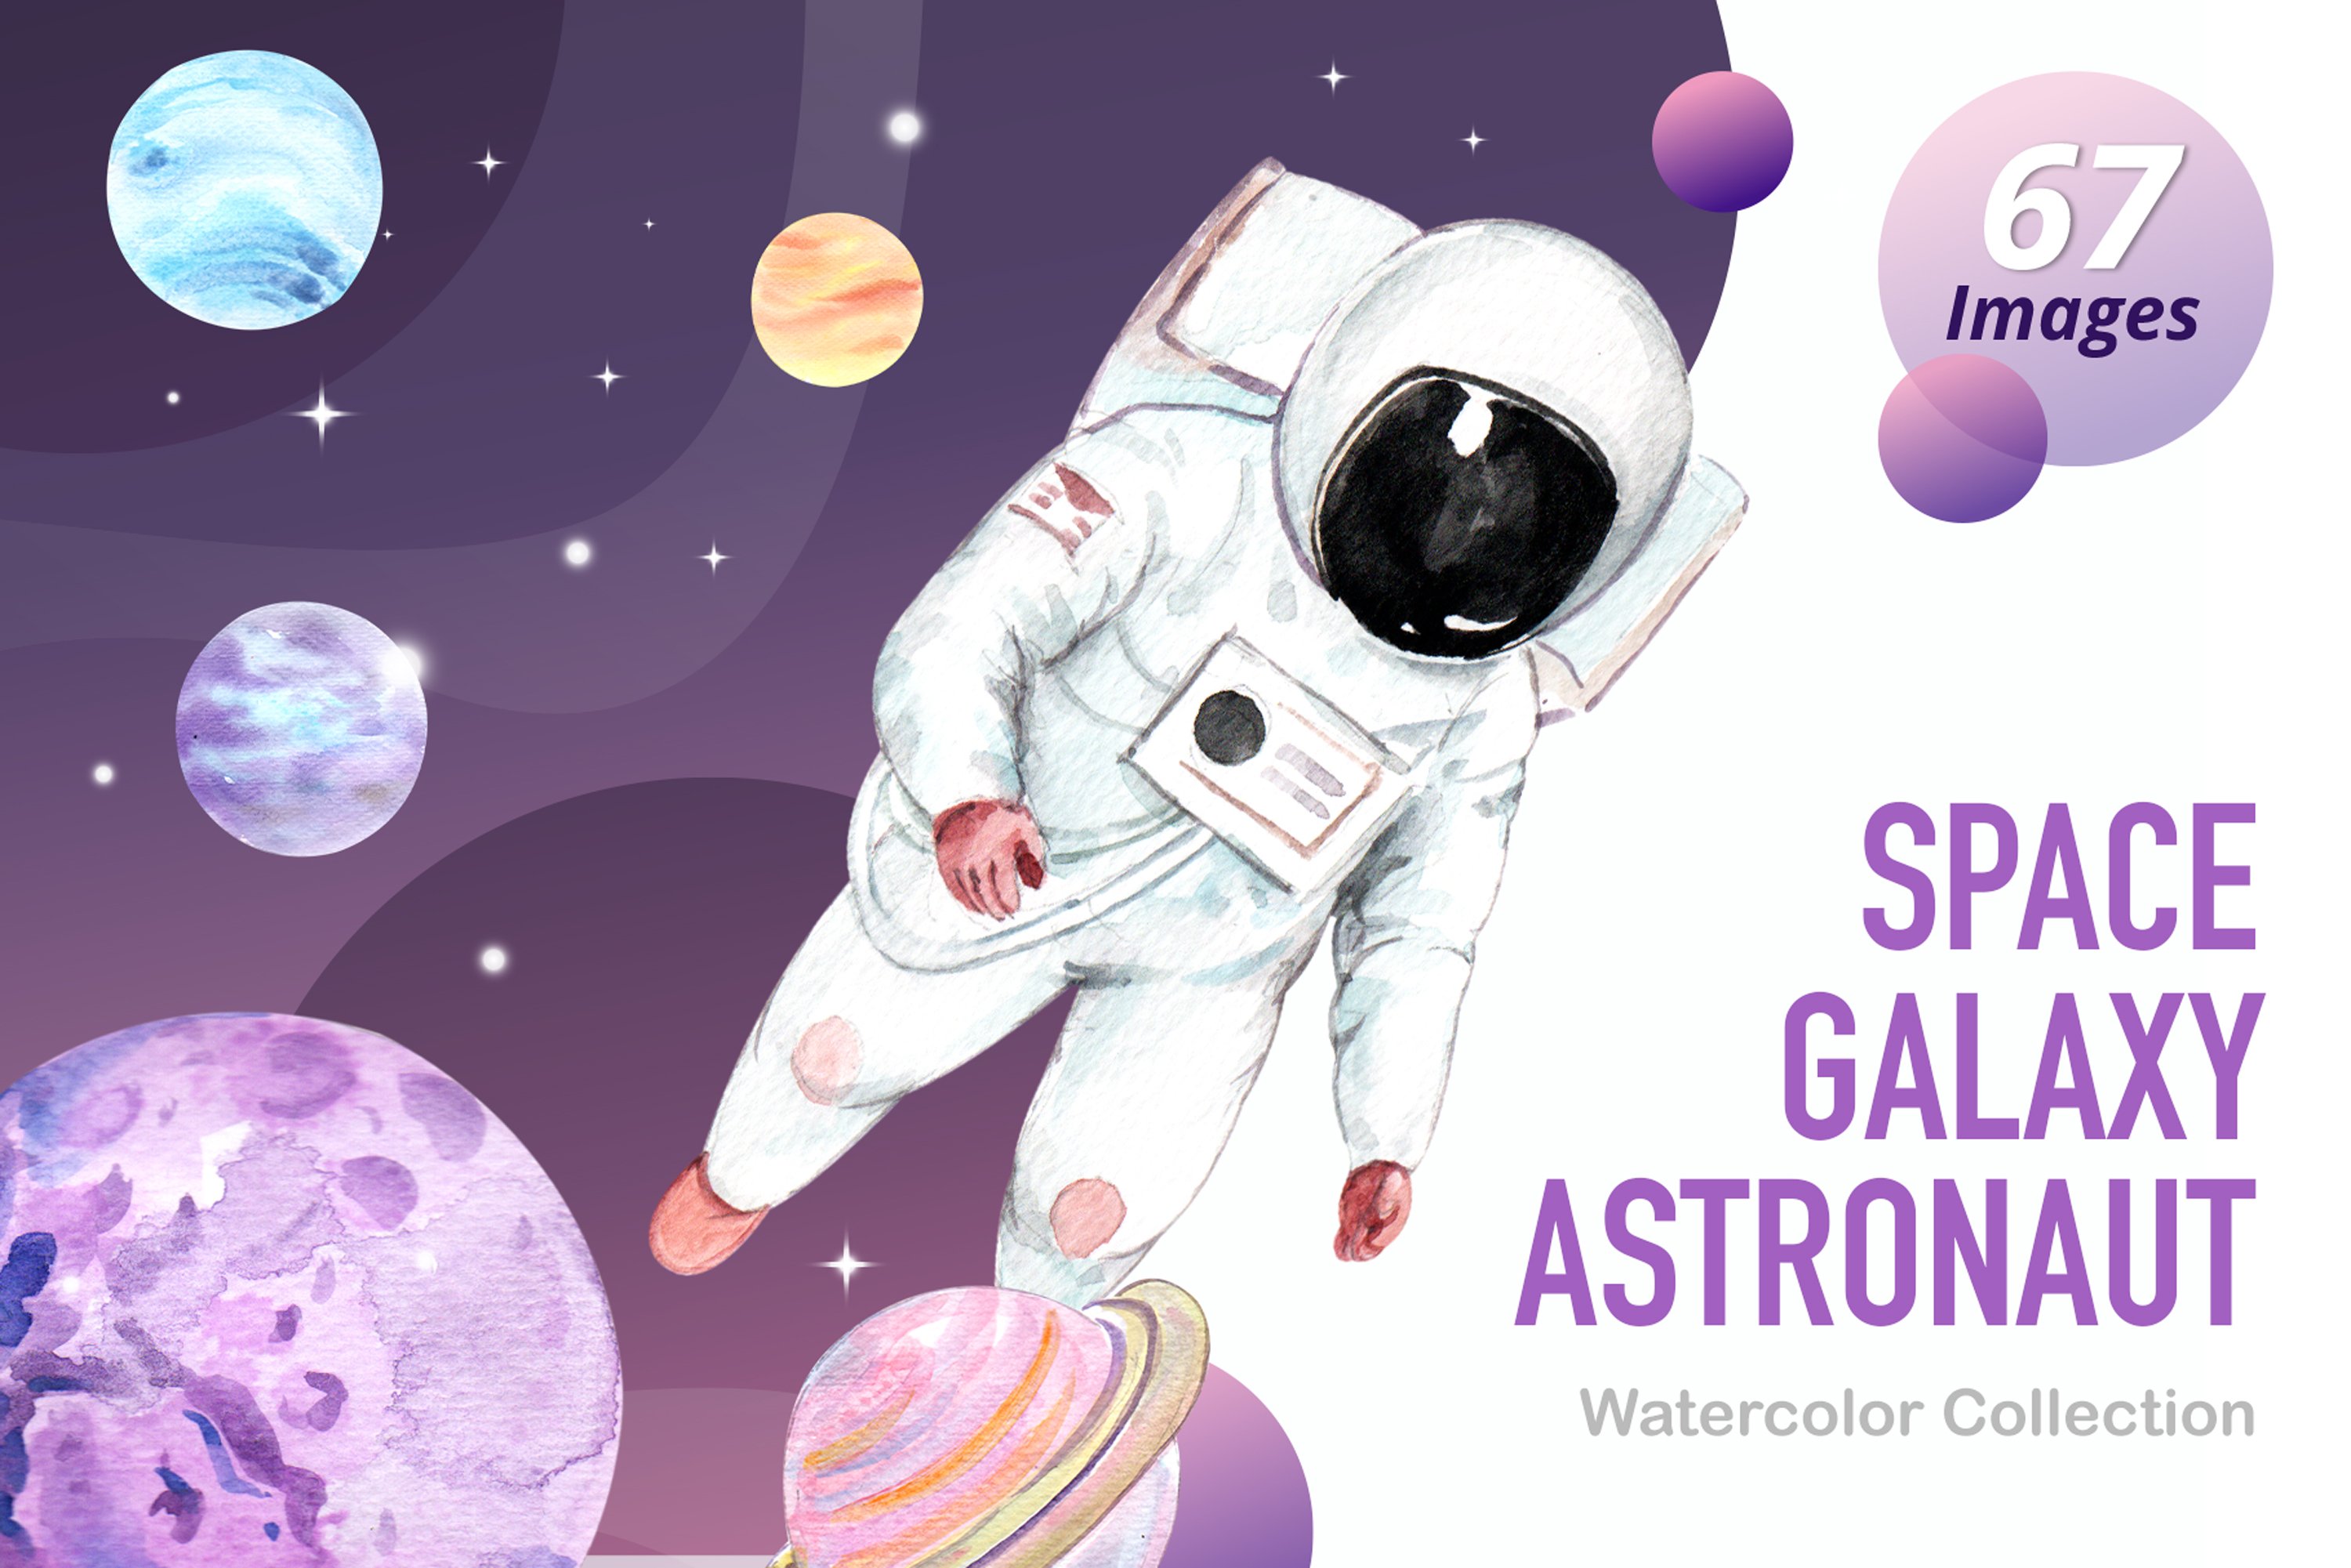 Space Galaxy Astronaut Watercolor cover image.